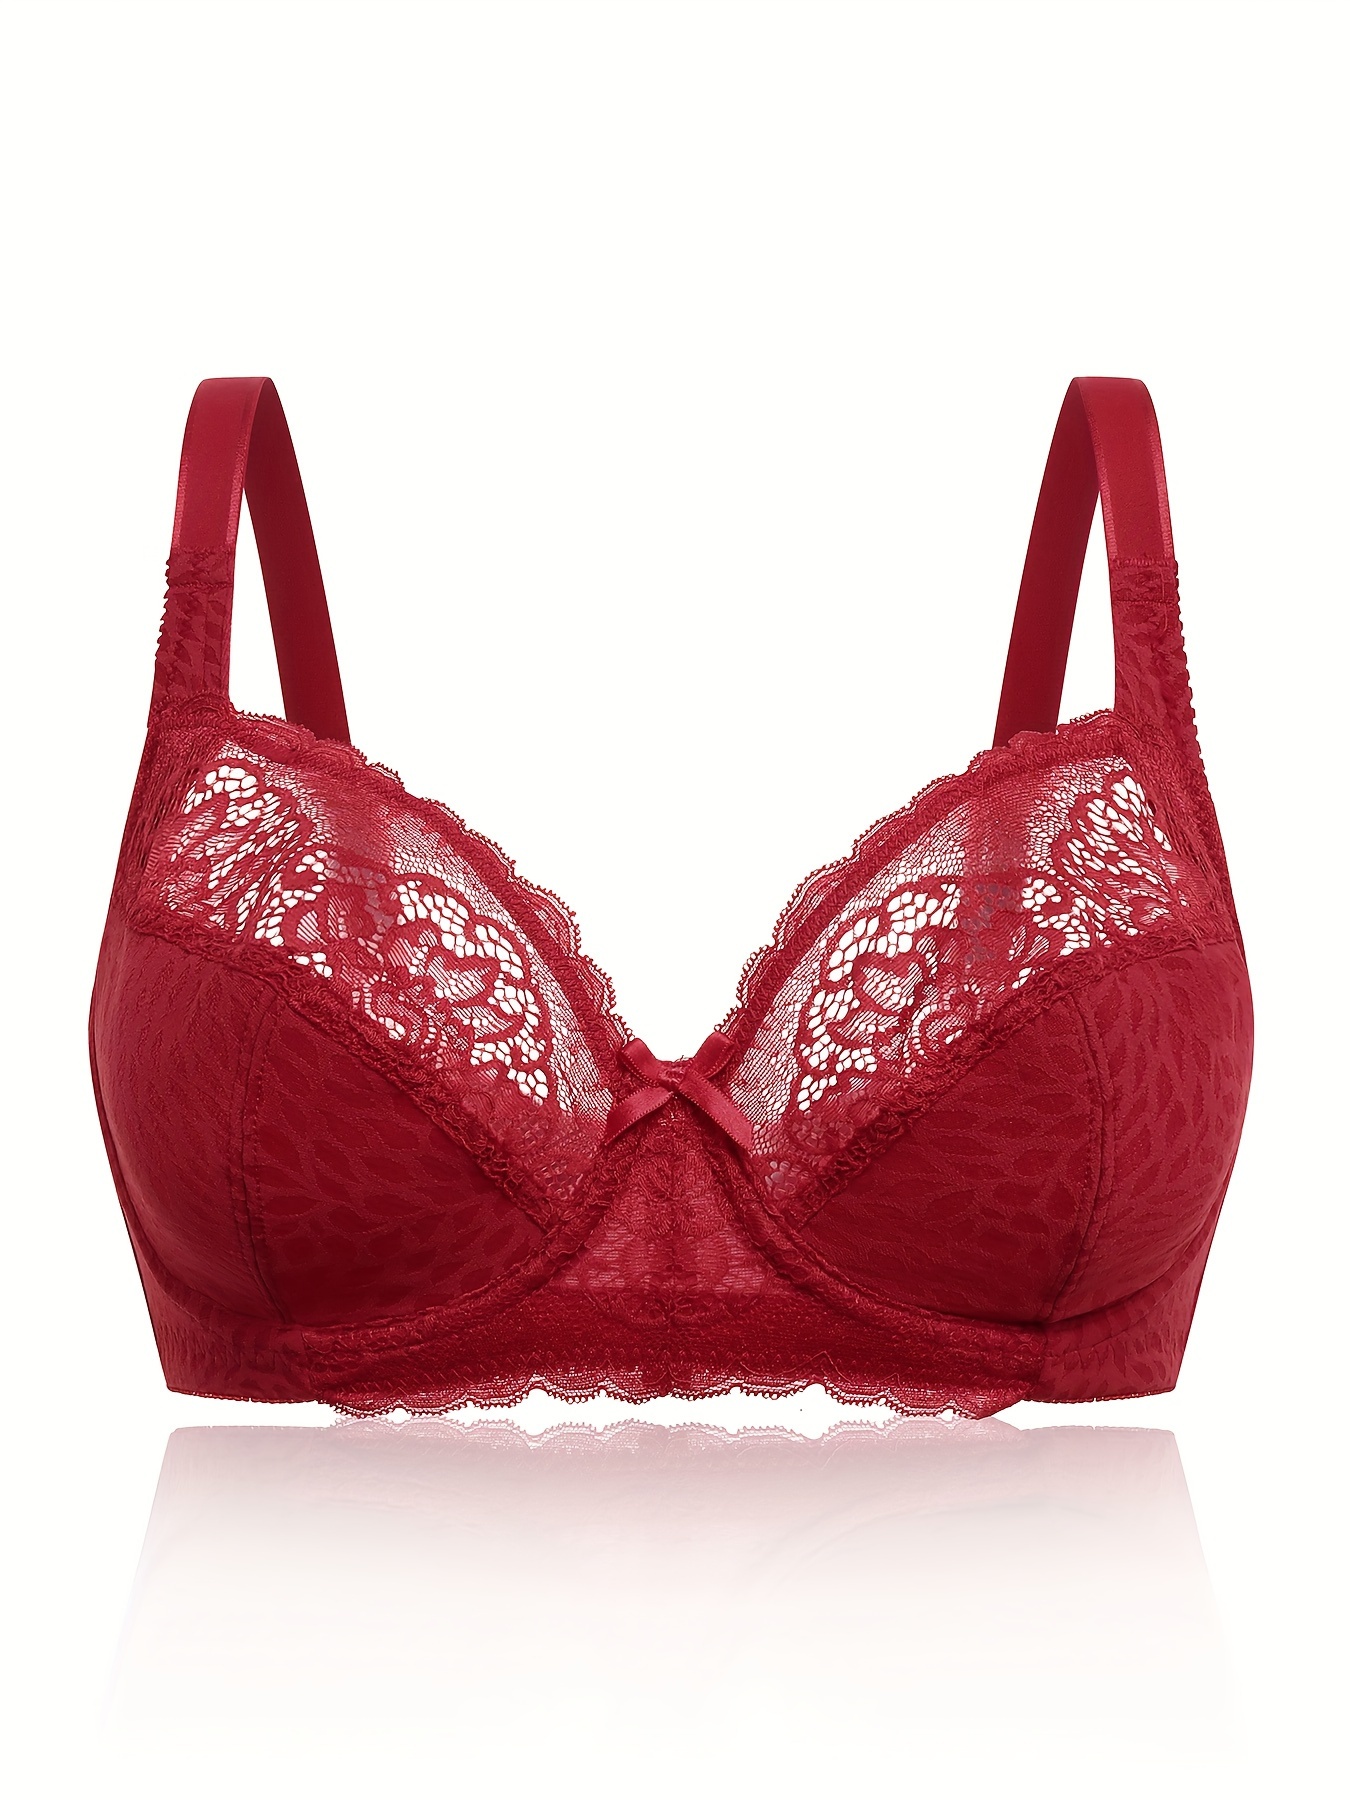 adviicd Balconette Bras for Women Full-Coverage Wirefree Bra, ComfortFlex  Fit Convertible Bra for Everyday Wear Red X-Large